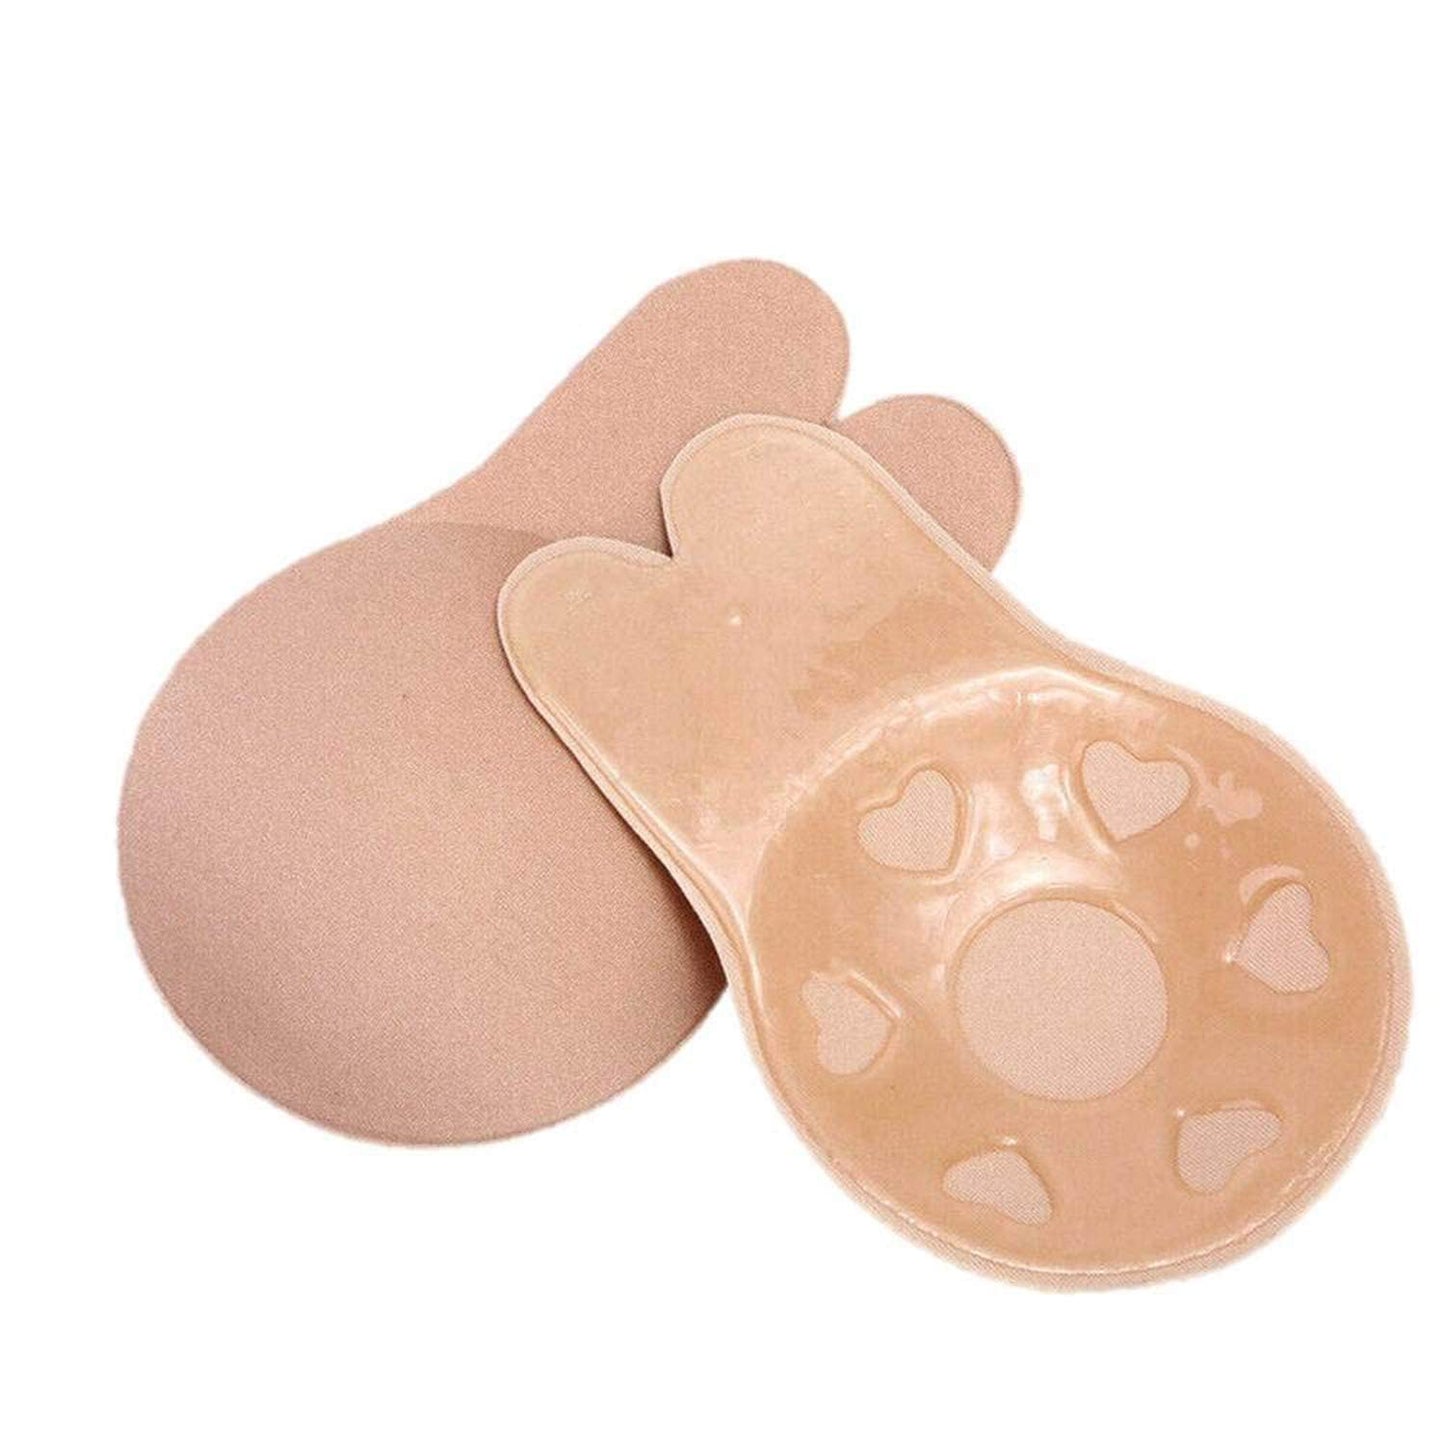 Adhesive Nipple Cover And Lift Plus Size